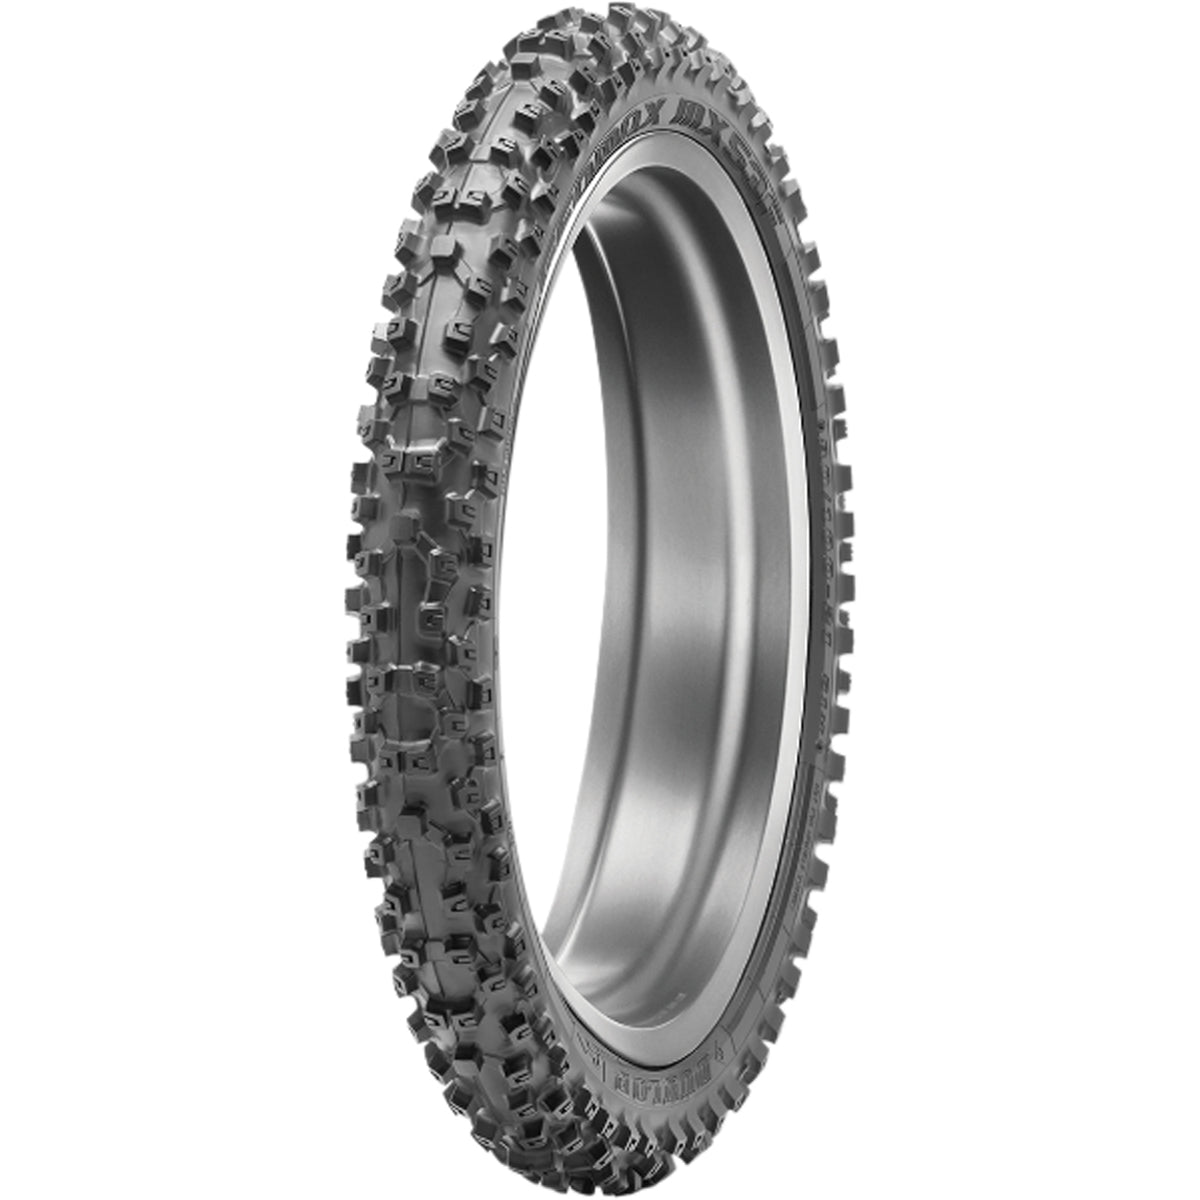 Dunlop Geomax MX53 19" Front Off-Road Tires-0312